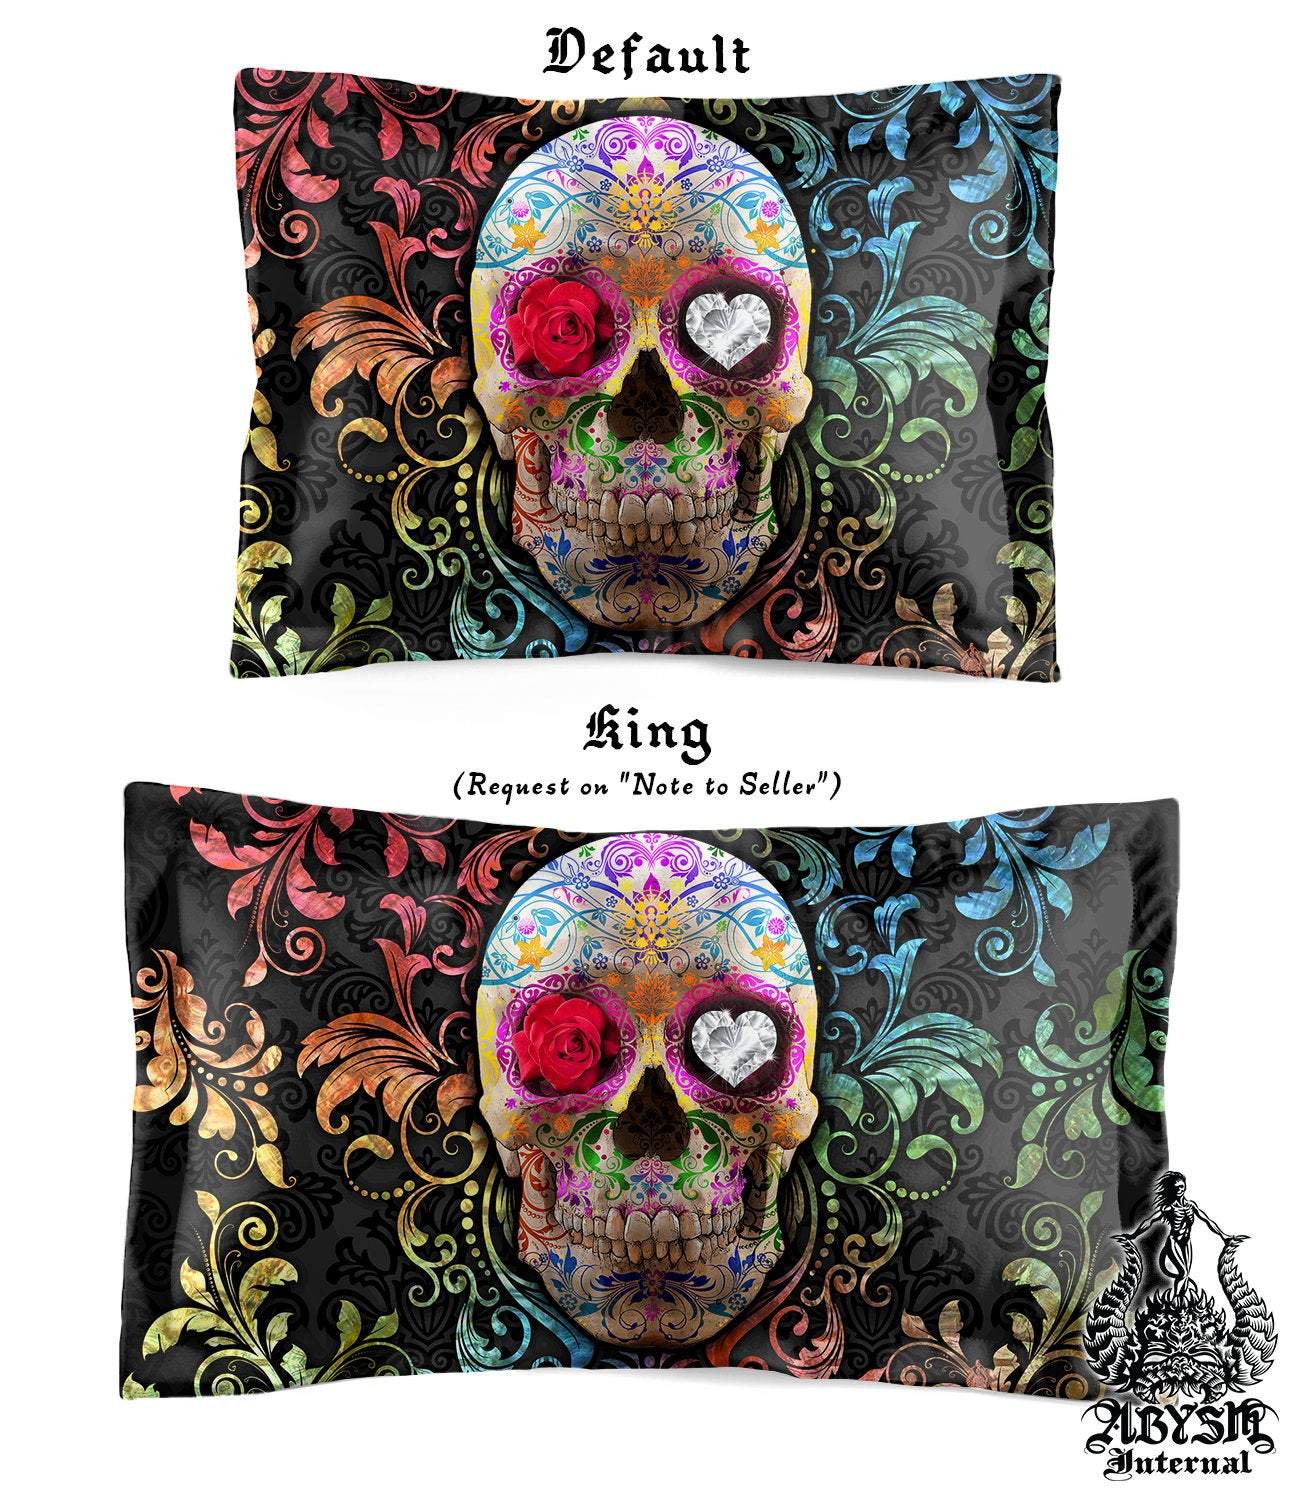 Sugar Skull Bedding Set, Comforter and Duvet, Indie Bed Cover and Bedroom Decor, King, Queen and Twin Size - Day of the Dead, Dia de los Muertos - Abysm Internal